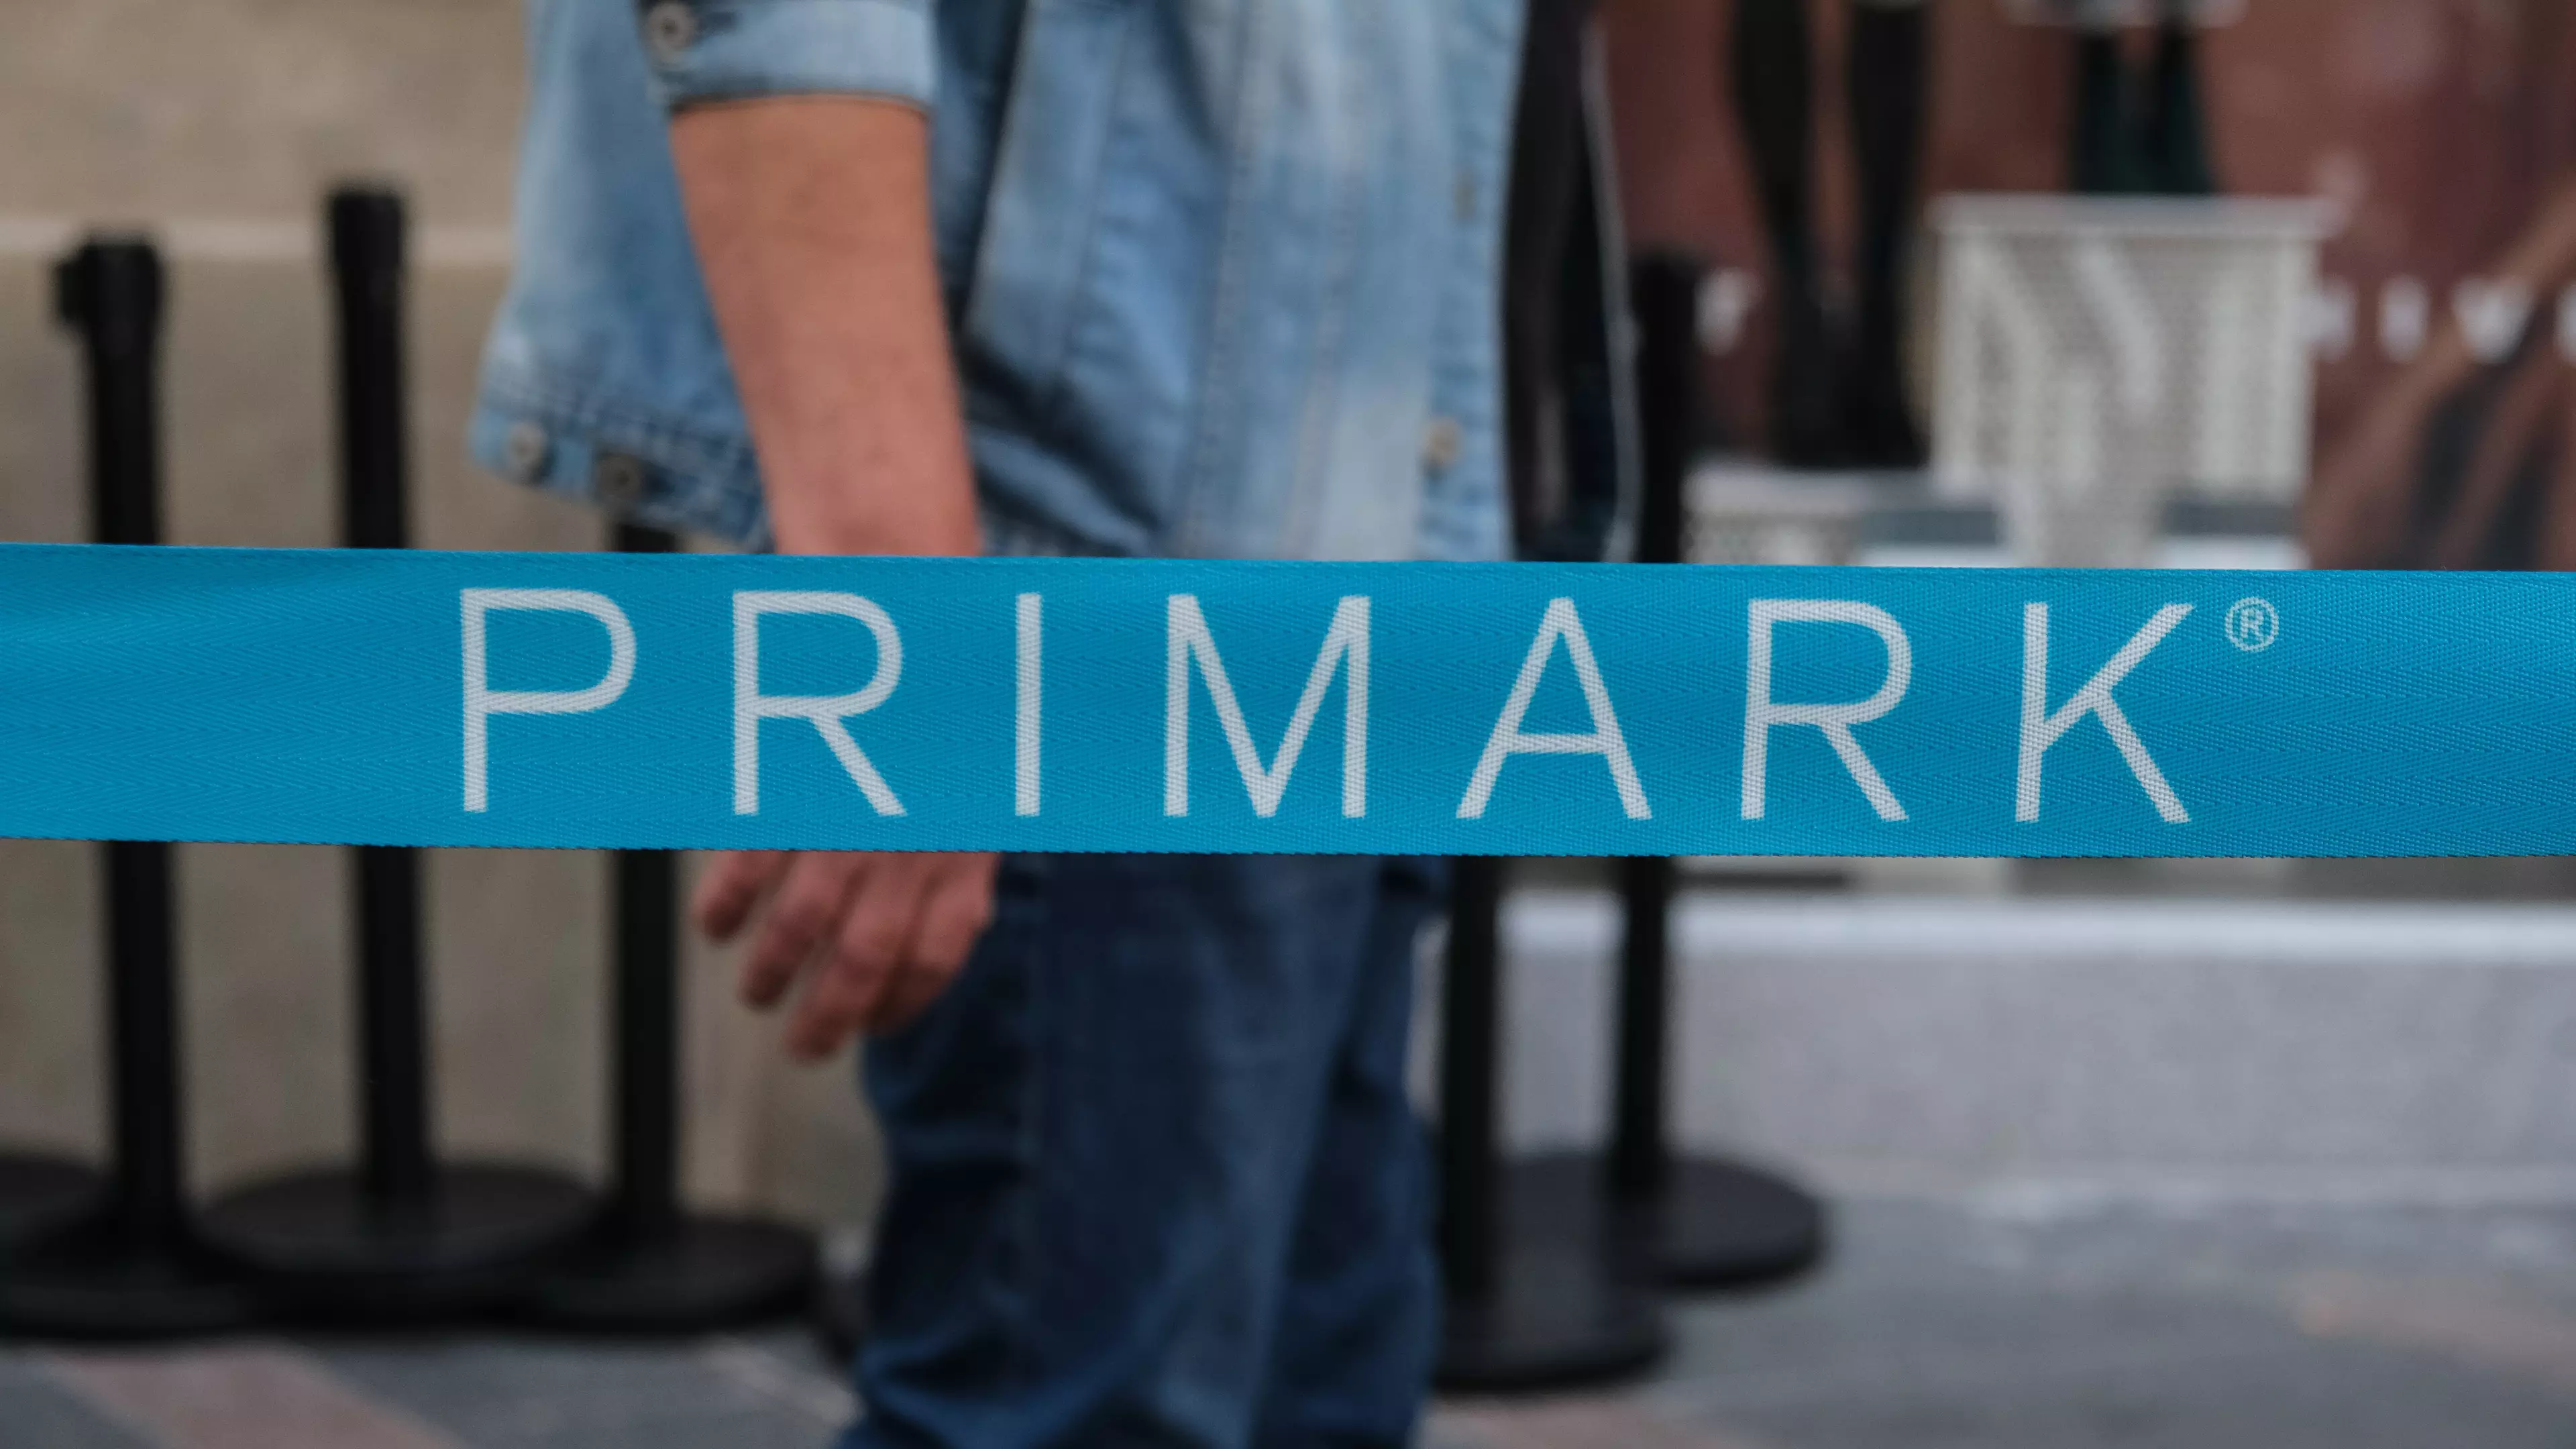 Fragment Of 'Human Bone' Discovered In A Pair Of Primark Socks